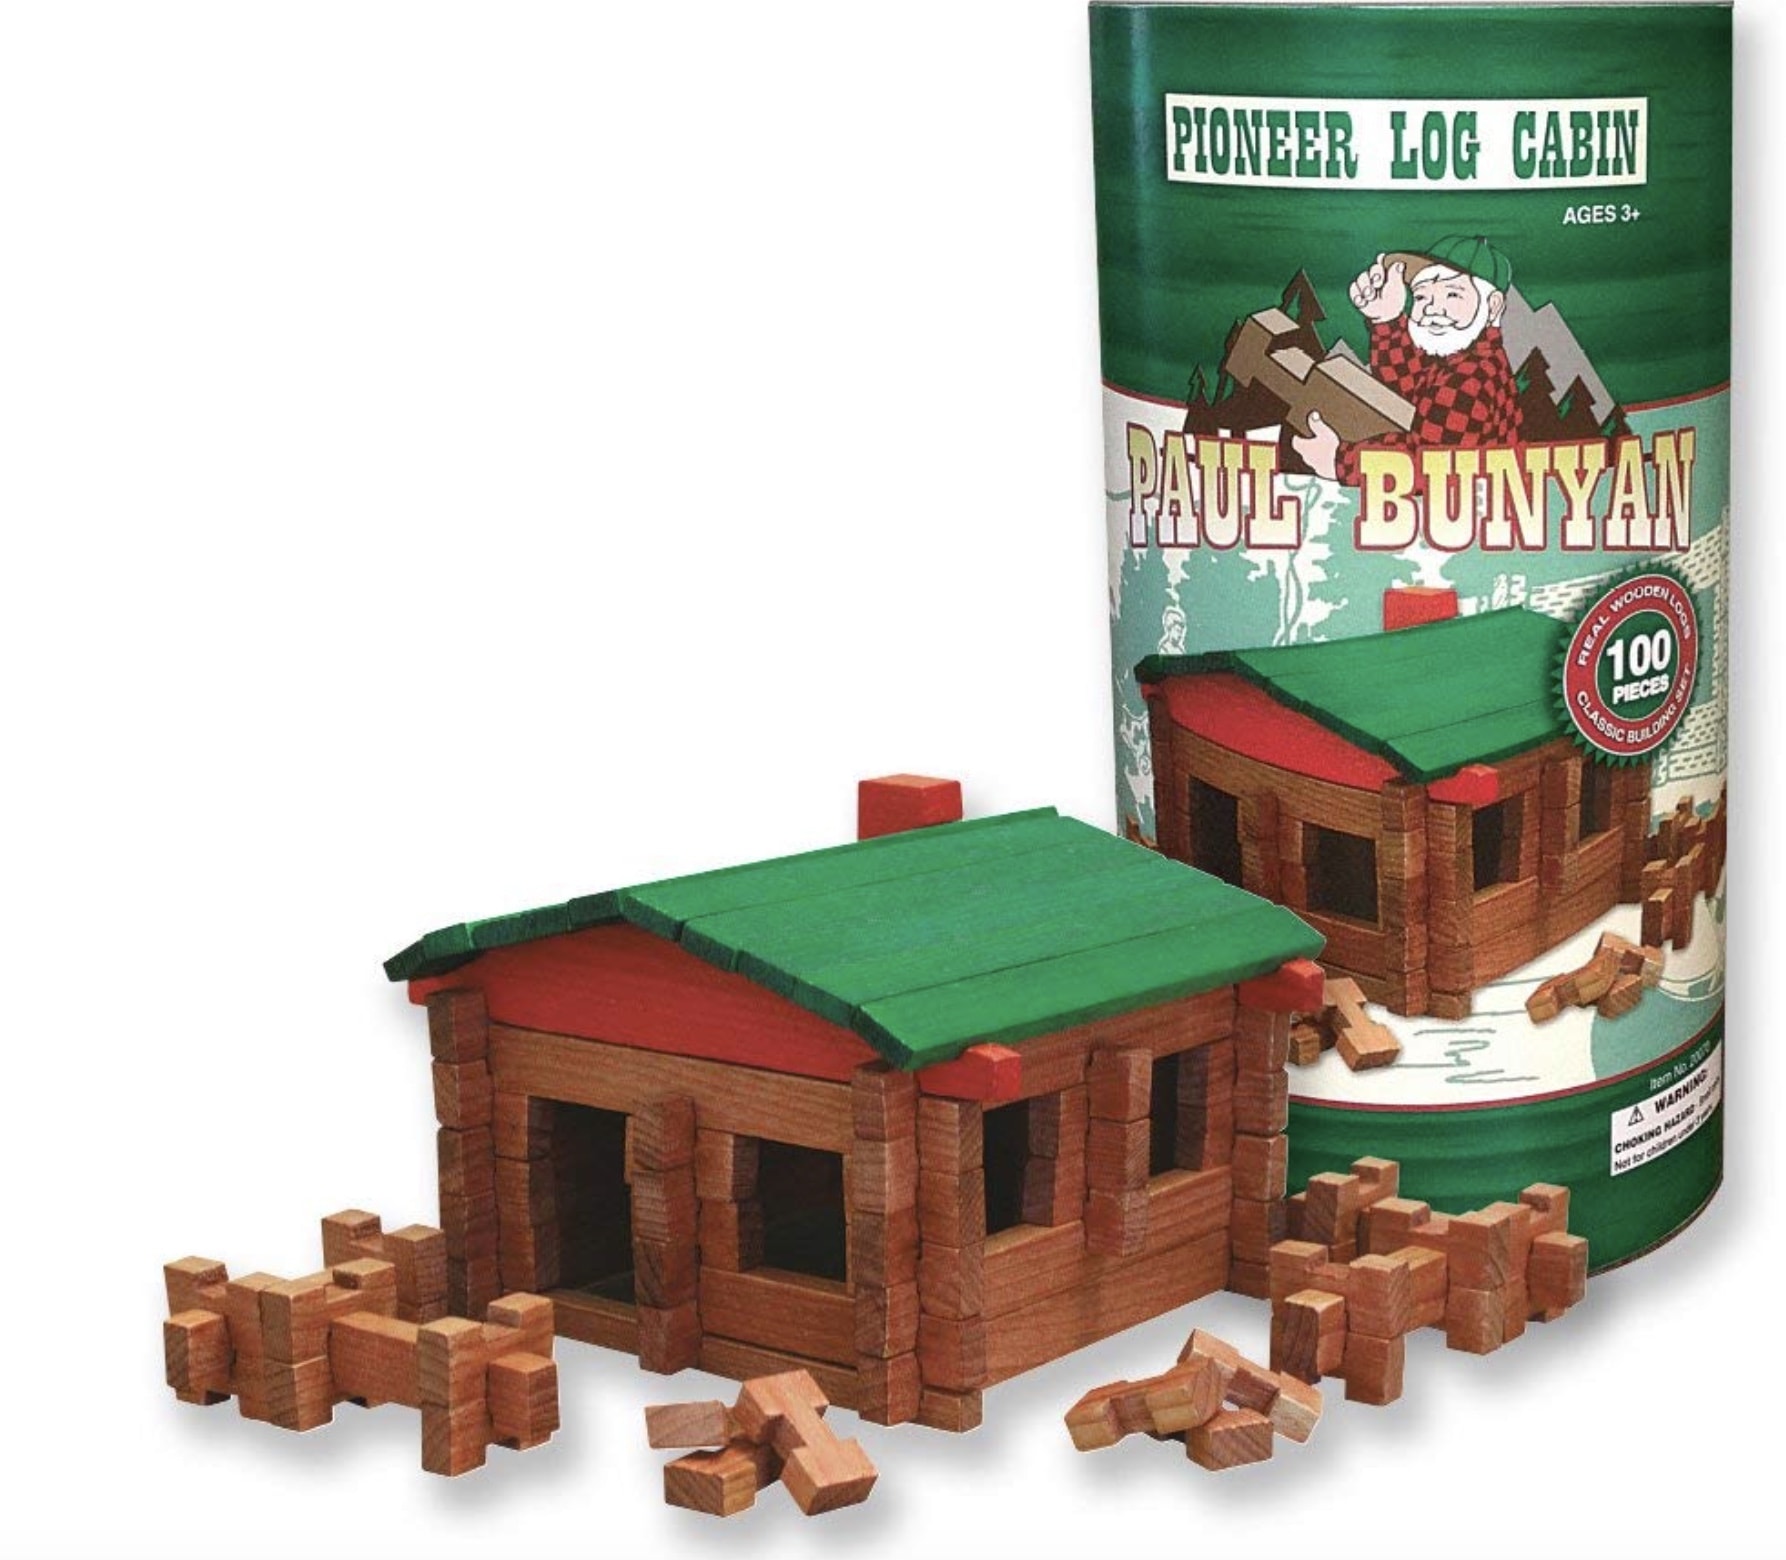 Roy Toy Wooden Log Sets: Like Lincoln Logs But Made in the USA - Get Green  Be Well